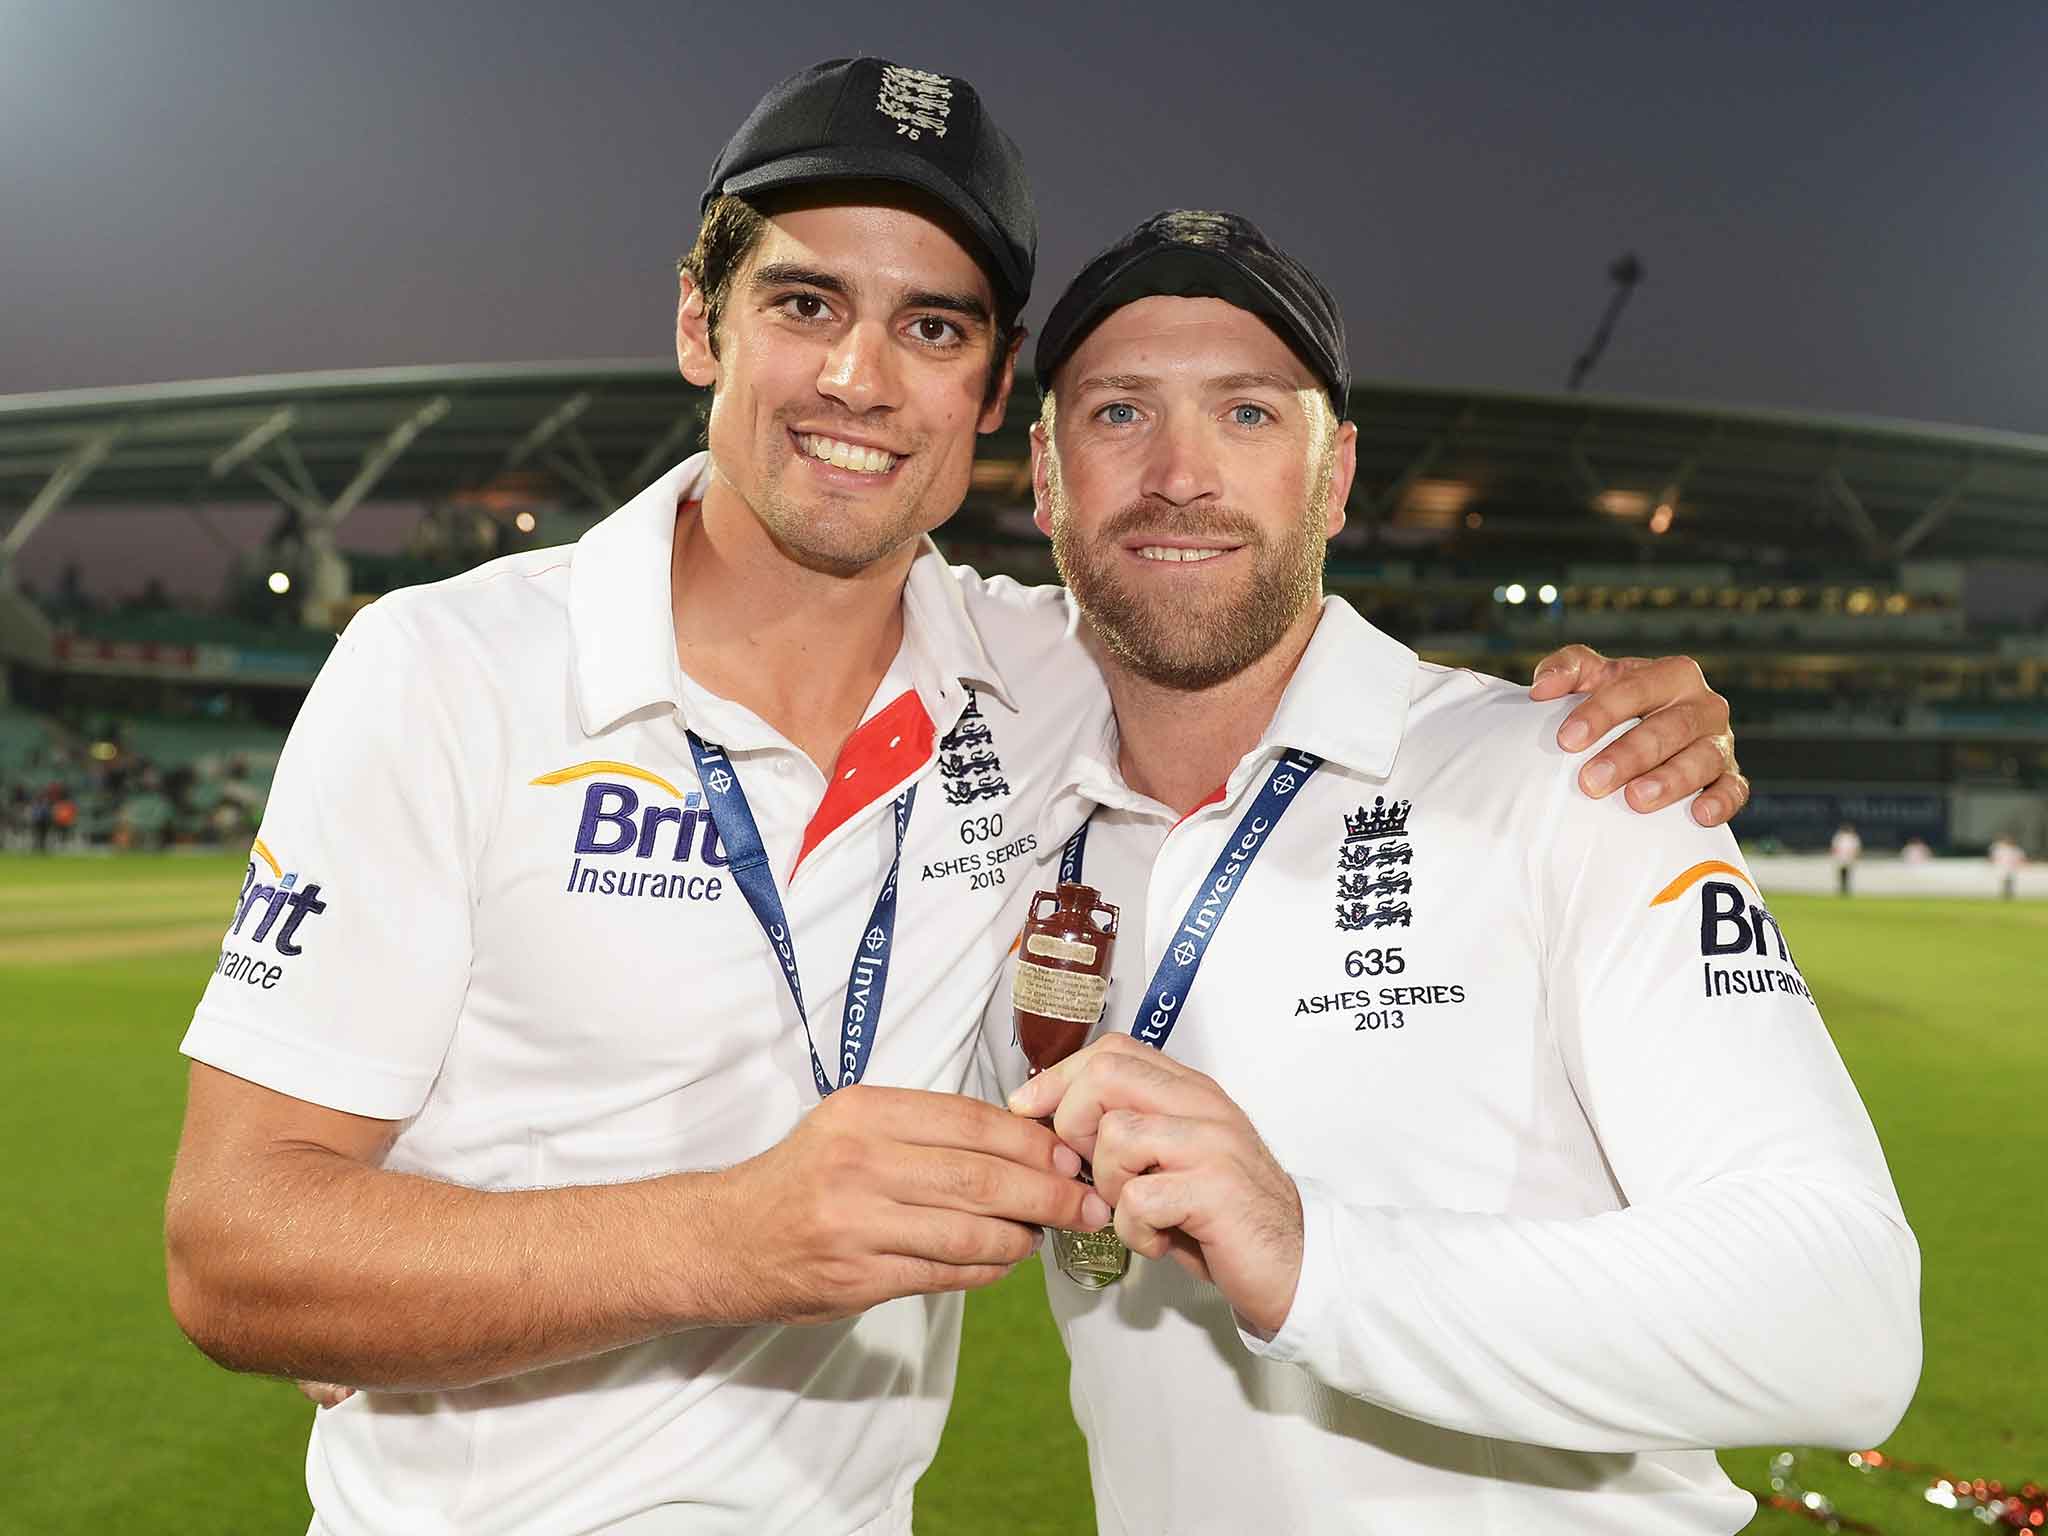 Prior alongside England captain Alastair Cook after winning the 2013 Ashes